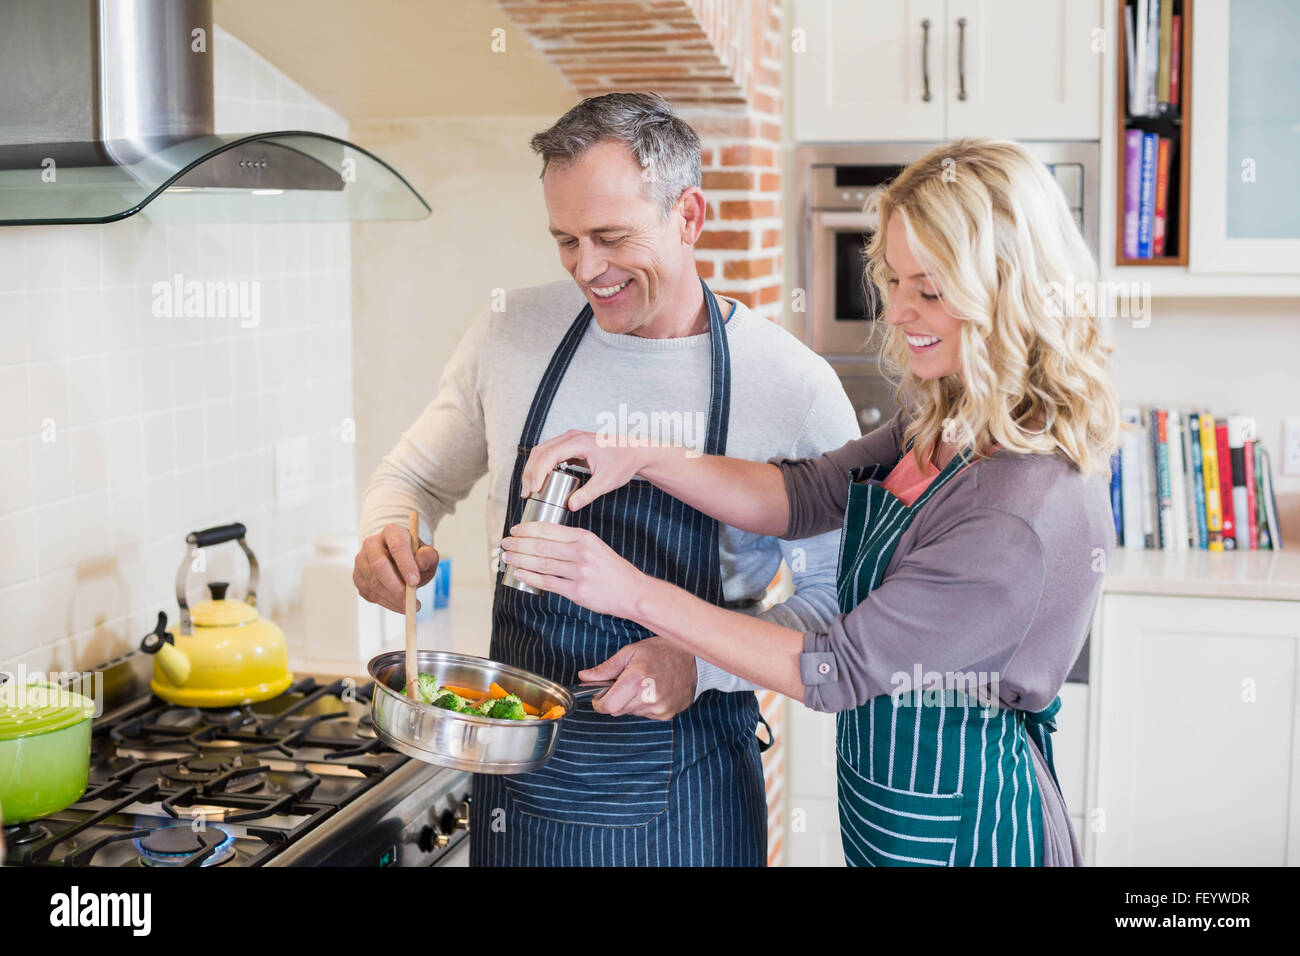 Cute couple cooking Stock Photo